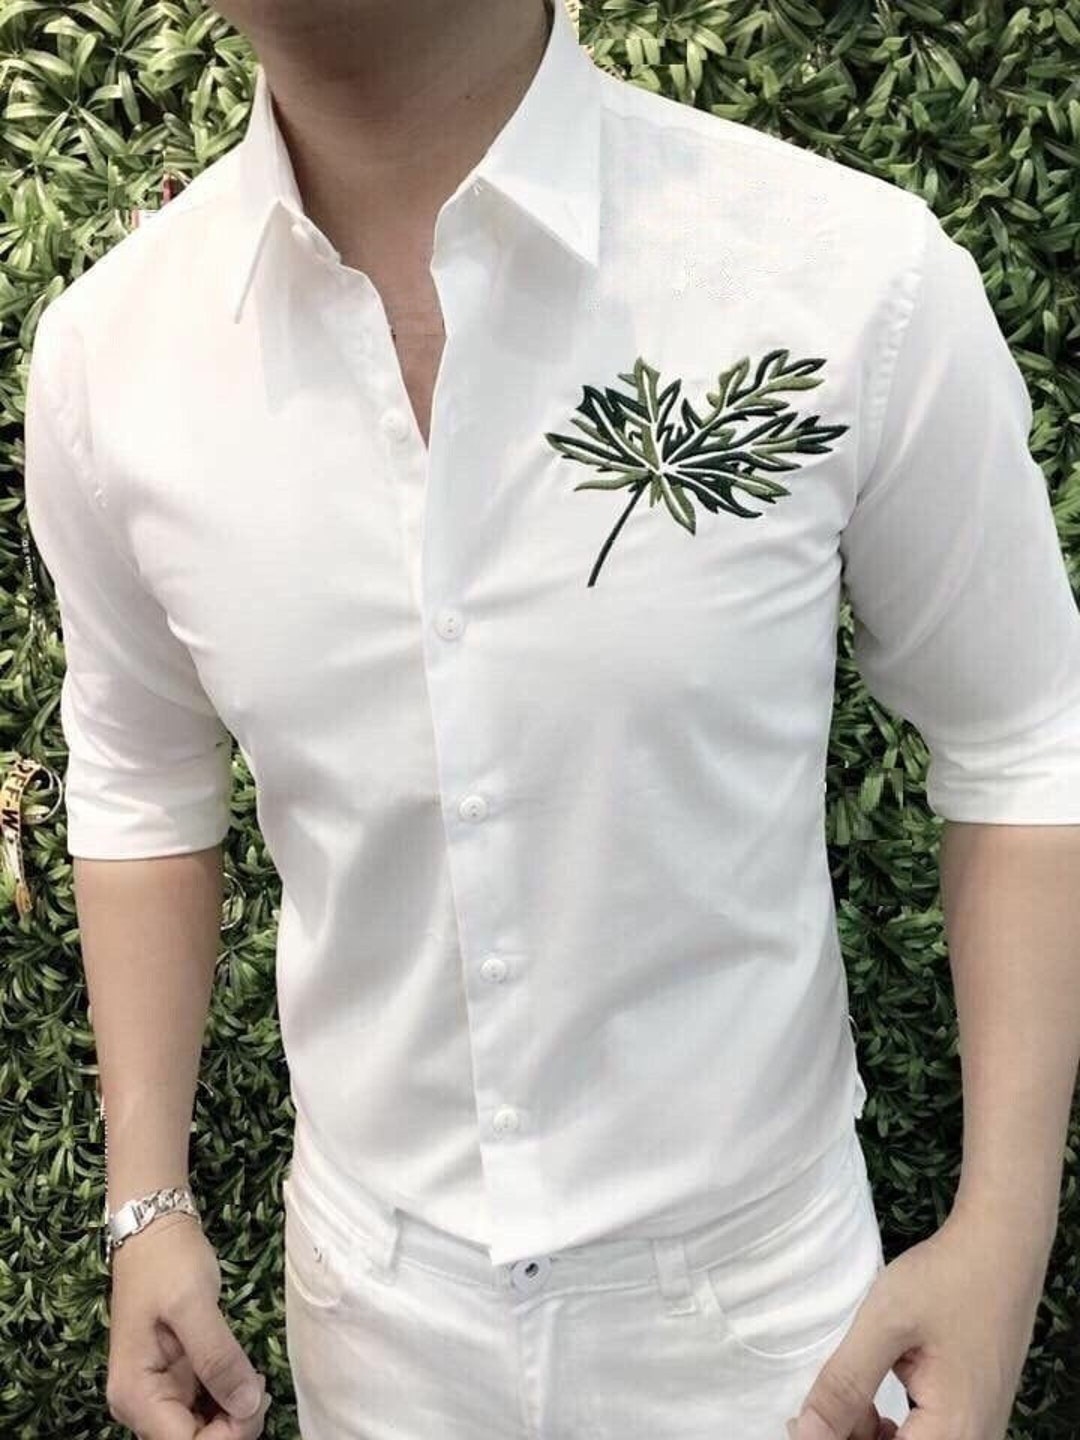 Ethnic Embroidered Men's Shirt Formal Button up Shirt Ethnic ...